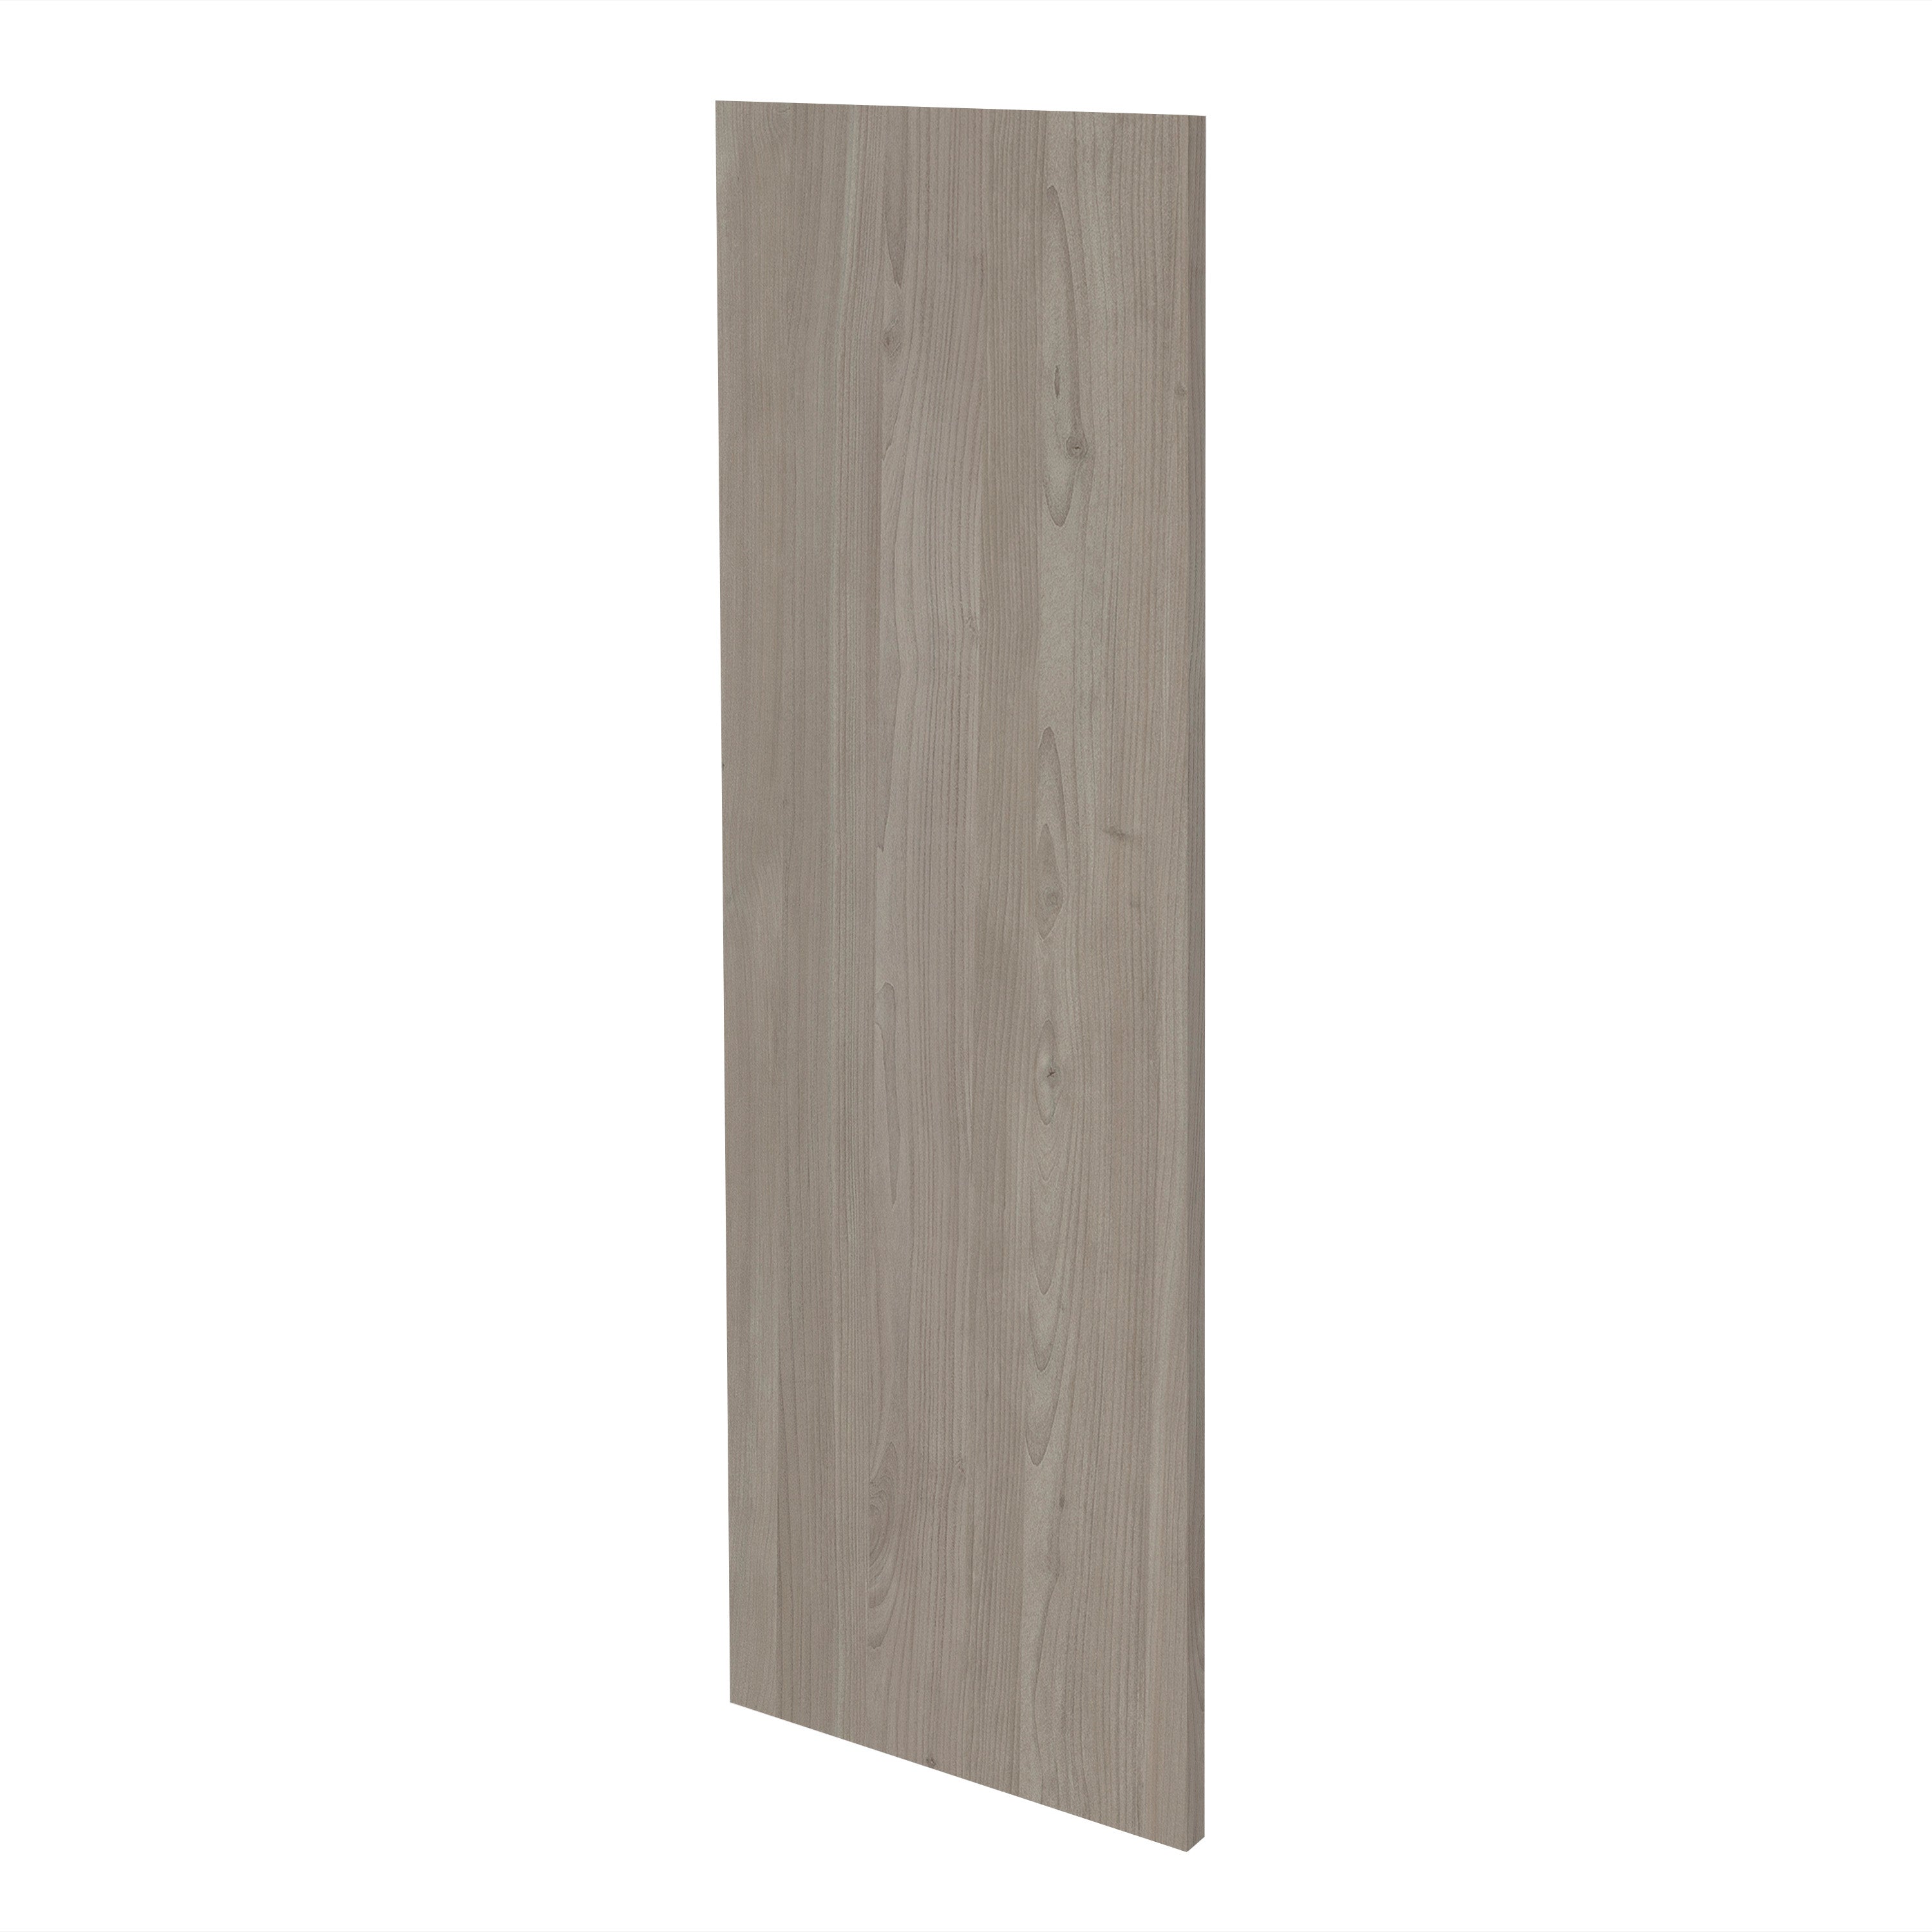 Grey Nordic Slab Style Vanity Cabinet End Panel (36 in W x 0.75 in D x 21 in H) -  Pro-Edge HD